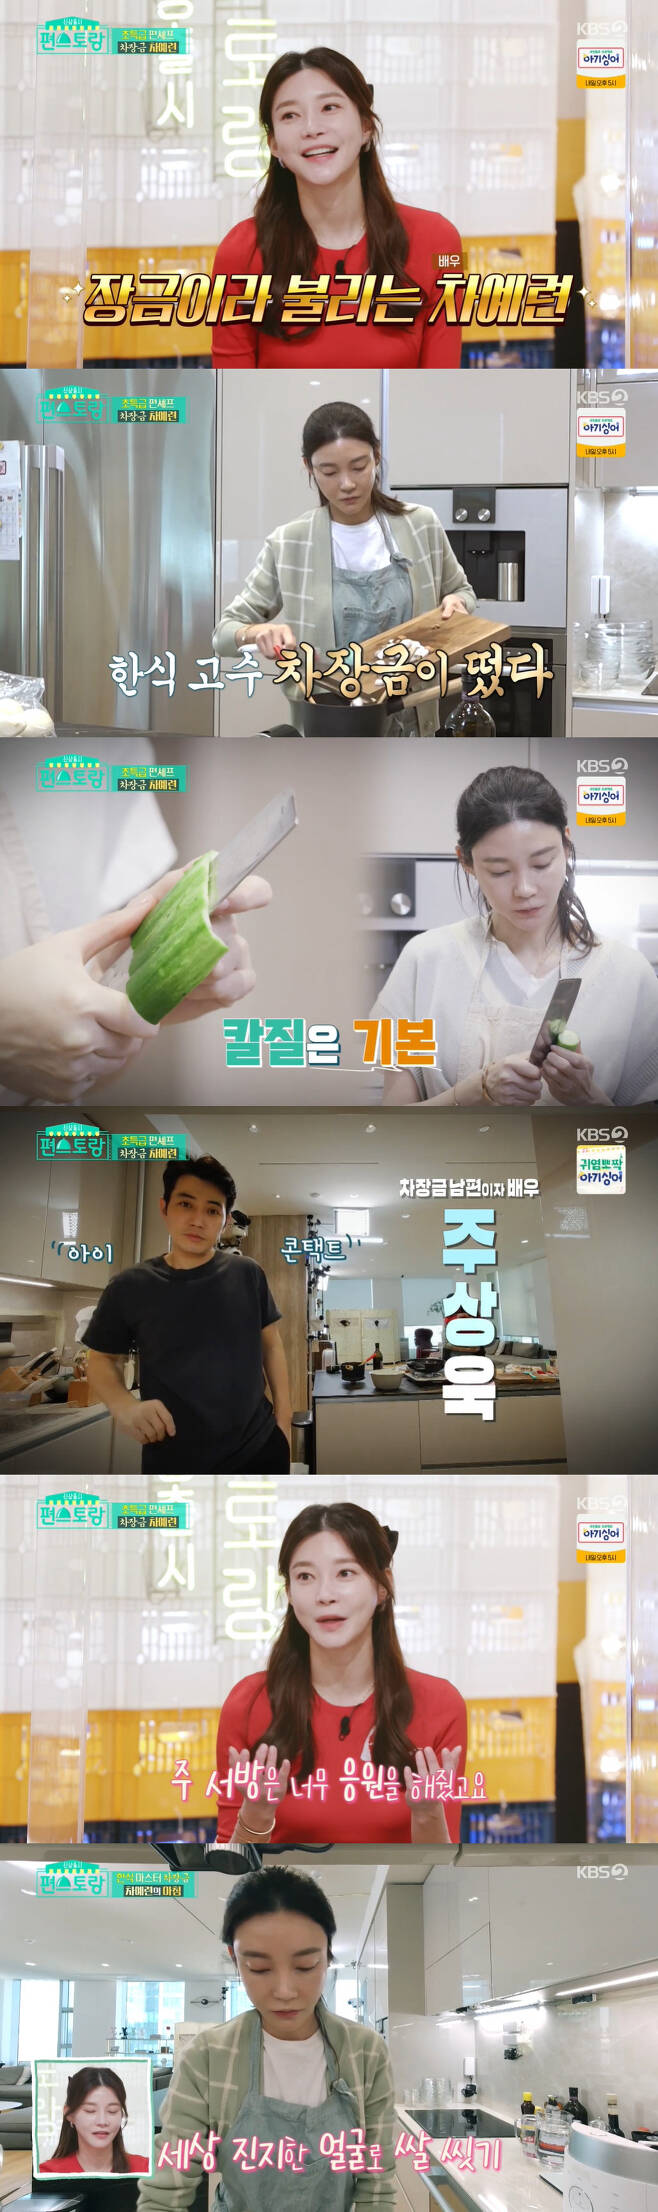 A sweet routine like the newlyweds of Cha Ye-ryun and Ju Sang Wook couple in their sixth year of marriage has been revealed.On the 25th KBS 2TV Stars Top Recipe at Fun-Staurant, the 39th menu development contest on the theme of Red Taste started, and Korean restaurant Cha Ye-ryun appeared as a new chef.Cha Ye-ryun, usually called Janggum-i, said, I usually eat at home because I have a husband and a child.It is a housewife who cooks rice, said Cha Ye-ryun.My husband cheered me a lot, and I came to appear with my husbands recommendation, he said. I cheered him up to win and come.Since then, Cha Ye-ryuns house with a neat interior has been unveiled, and Cha Ye-ryun, who opened his eyes early in the morning, headed straight to the kitchen.First, I prepared rice and kept the rice soup in a good way, and I attracted Eye-catching with steamed housewife Vibe.Cha Ye-ryun then quickly prepared the Kang miso and kale ssambap; Cha Ye-ryun said: My husband likes to drink.I like to drink soju in soju and pork belly in giblets. I tested it and said that cholesterol levels are high and neutral protein levels are high.I do not eat green vegetables, I die. It was my wifes diet to feed vegetables.The second menu was a simple shellfish spinach miso soup. Cha Ye-ryun said, I am really easy to eat Korean food. Family food is a finished Korean food. My husband married pasta and ate it for the first time.I went out with a goon, pork belly, and stew, he recalled. I think now that I did not have a lot of love with women, so I did not go to drink with my boyfriends. Then Jung Sang-hoon laughed, saying, You have such a guess.Thats when husband Ju Sang Wook appeared with his 5-year-old daughter, Cha Ye-ryun, laughing, Its six years of marriage, Ive lived long.Cha Ye-ryun and Ju Sang Book developed into lovers, appearing together in the 2015 drama Gorgeous Temptation.Ju Sang Wook and his daughter helped his mother Cha Ye-ryun prepare for breakfast, and in this process Ju Sang Wook attracted Eye-catching as a lover husband who listened to his wifes request.After that, her husband and daughters customized meal was completed, Ju Sang Wook praised It is delicious. No one cooks like this at home. Thank you. Kimchi is really delicious.At that time, Cha Ye-ryun asked, Idea is different. So Ju Sang Book was worried about the menu together, and the message he exchanged with Cha Ye-ryun was released afterwards.In the process, MCs were surprised by the heart-breeding message: I lived early in my life with my family.I wanted to get married quickly, he said. I was so happy to eat with my family who bought delicious food, so I was able to eat. Since then, Cha Ye-ryun has attracted Eye-catching with Some Like It Hot, which makes a milky kit for her husband, who has a lot of peanut butter octopus fried, green tea-hot chicken skewers, and a provision shoot.Jung Sang-hoon also prepared a Gwangju-style oritang for the pregnant gag woman Lee Su-ji, I want to eat something big.The cast of Oritang, which is filled with some Like It Hot, dropped the ducks boiled well in the wild dog juice, and the cast admired it as delicious.Then, I made a side dish for Lee Su-ji until the old oil and miso armed Achievement.Lee Su-ji, who met Jung Sang-hoon shortly after, was impressed by I am like a mother.Lee Young-ja and Aiki went on a red taste tour of Eunpyeong-gu.At that time Aiki presented a dance prepared for the dance crew Hook (HOOK) and Stars Top Recipe at Fun-Staurant, and Lee Young-ja said, Its great.The standing ovation comes out, he said, jumping up from his seat and applauding.Aiki said: My father is a chef, my father prepared the marinated crab he dipped himself.I had to bring it to my hometown Dangjin for 4 hours the day before, he said.Lee Young-ja started eating marinated crab with white rice on the spot.Aiki and Hook members who became intuitive about the wonderful food of Lee Young-ja, the mother of the food, were surprised.Lee Young-ja and Aiki went to the Yeonseo market to taste cauldron tteokbokki and red fish cake, and they poured out admiration for the taste of luxury tteokbokki.